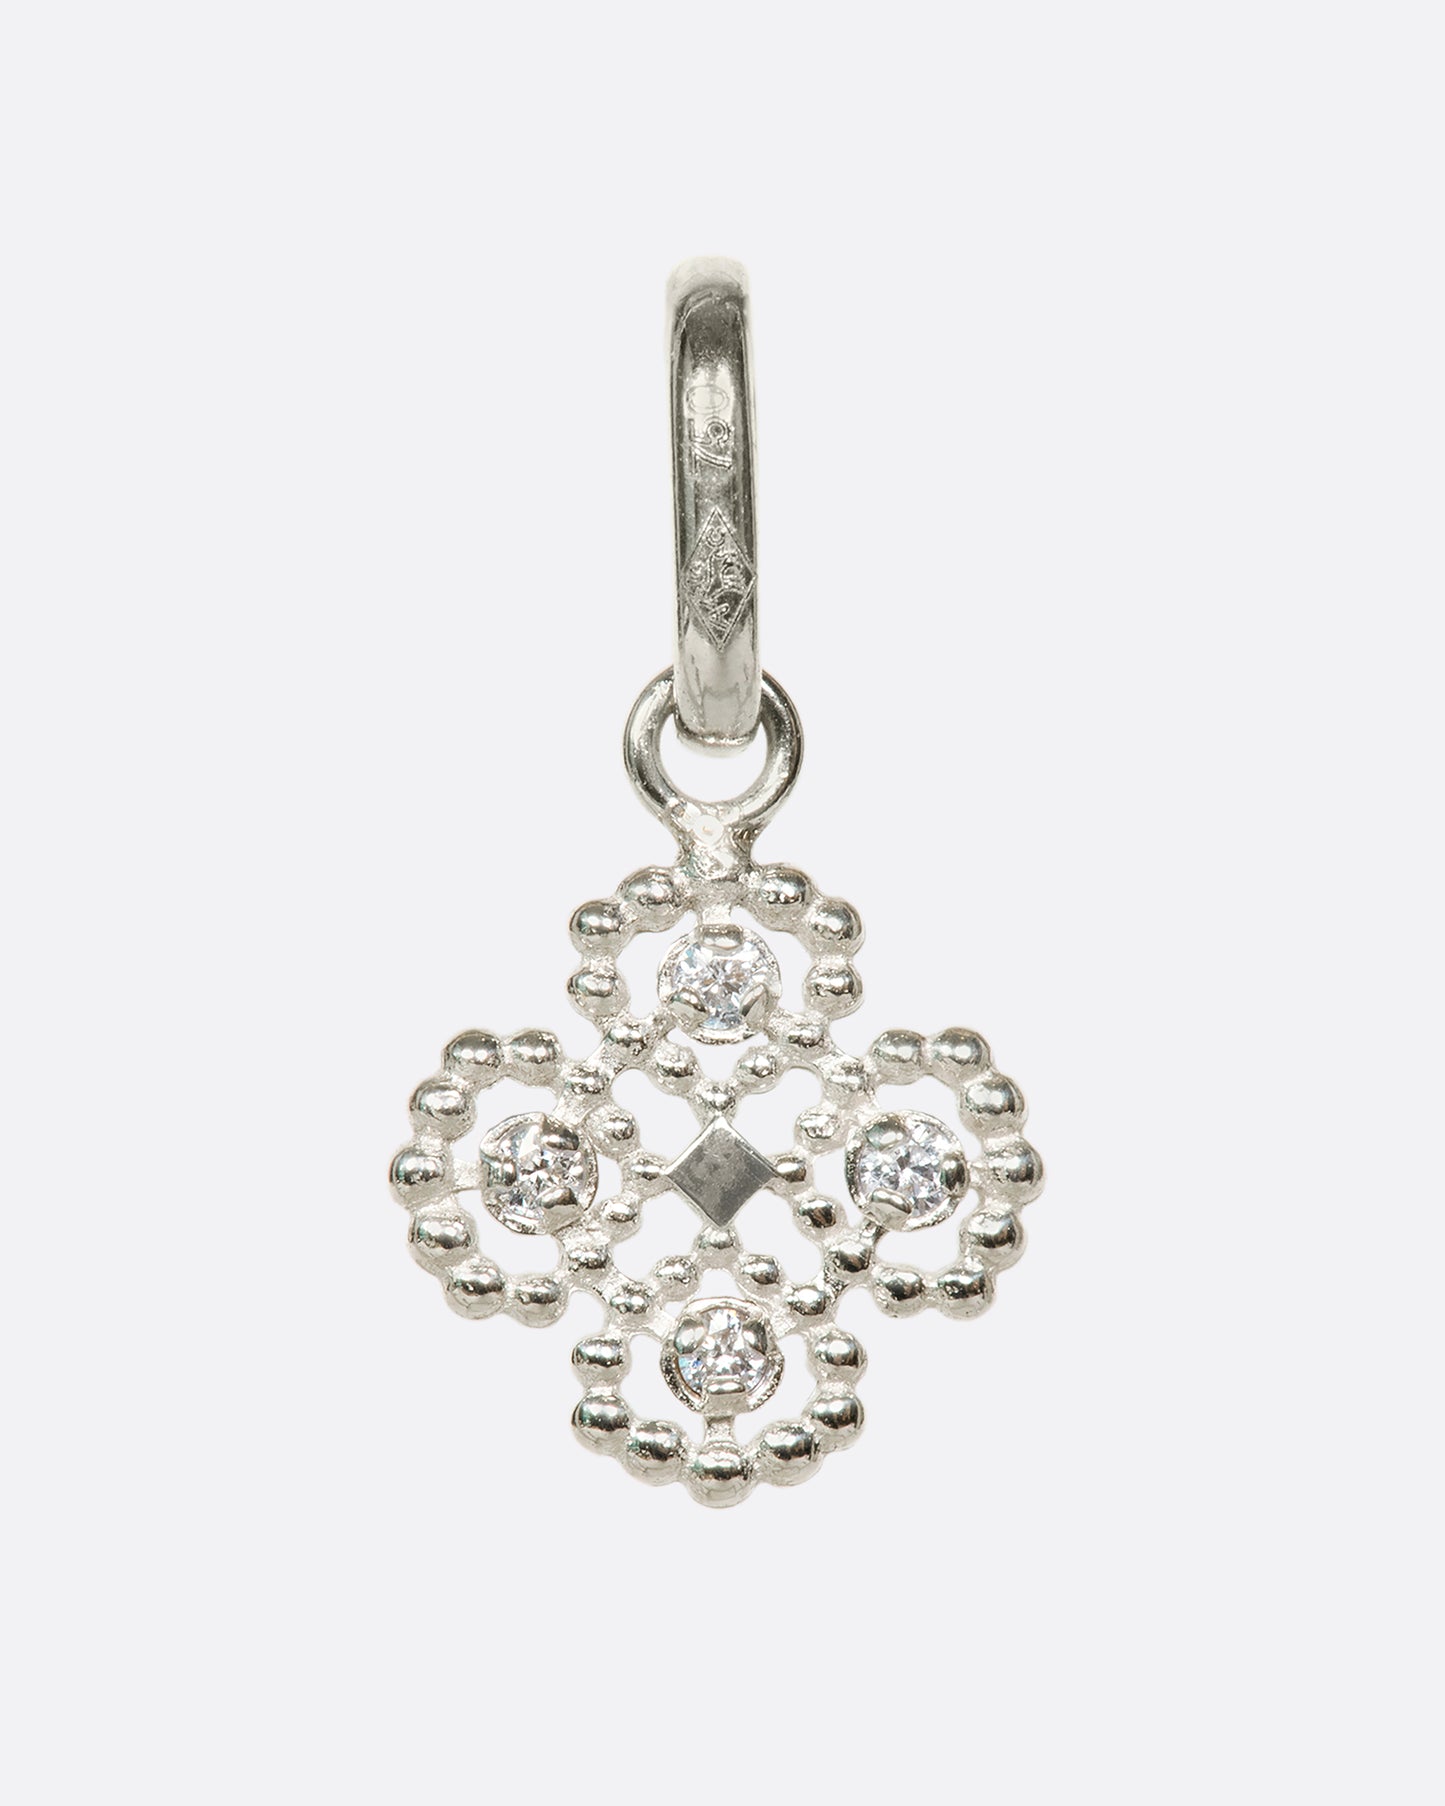 An 18k white gold clover pendant with round diamond details